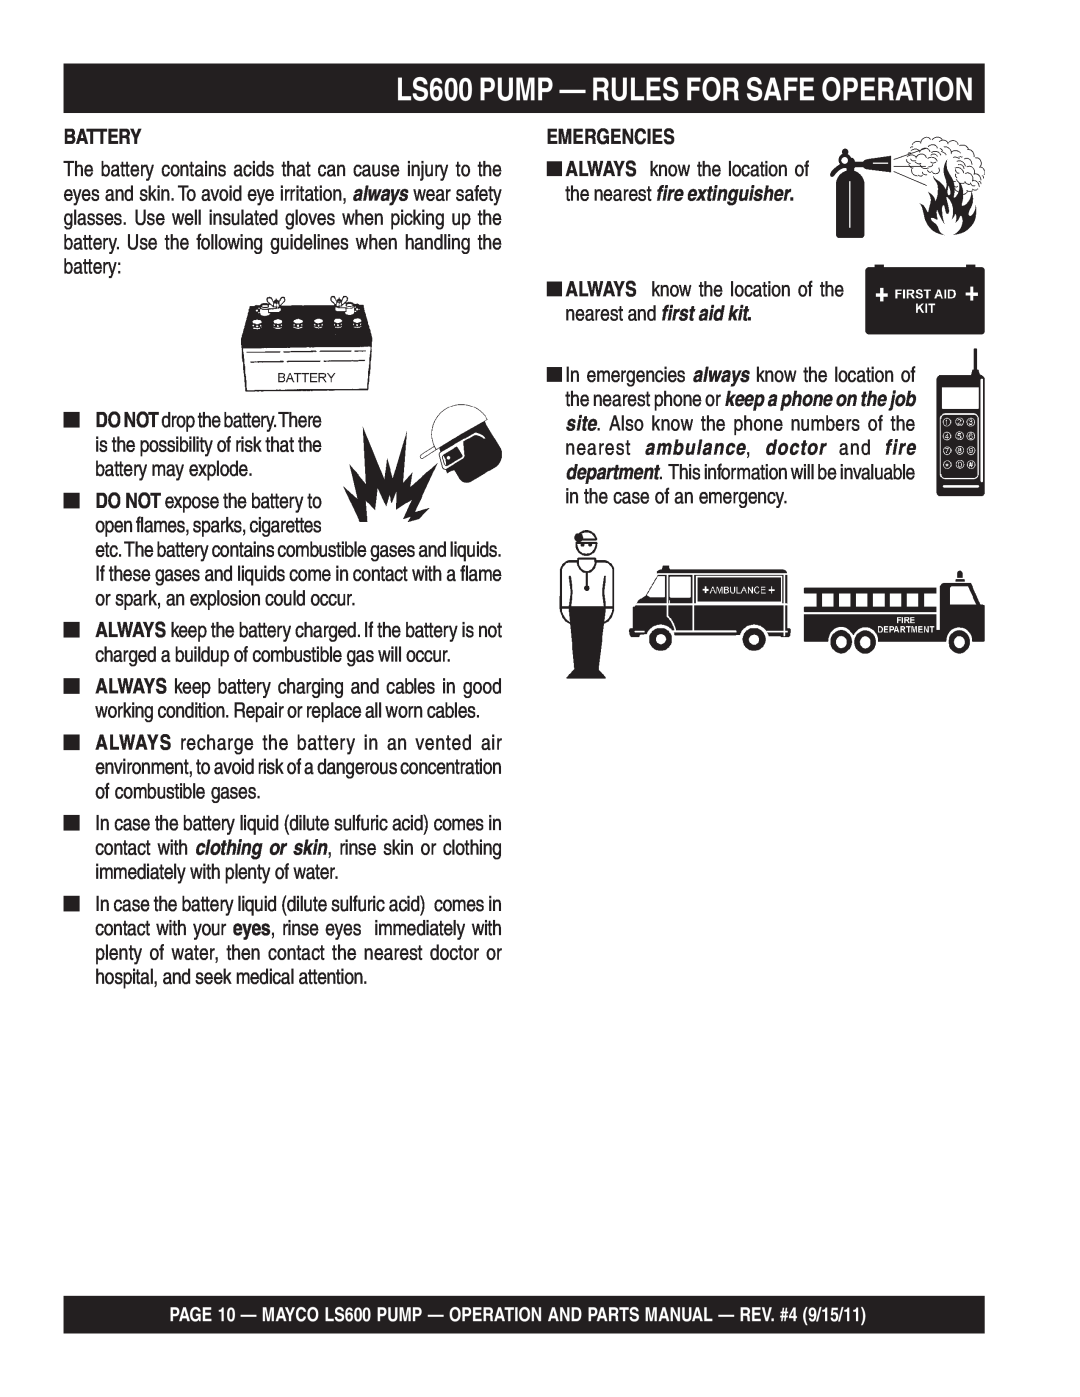 Multiquip manual LS600 PUMP — RULES FOR SAFE OPERATION, Battery, Emergencies 